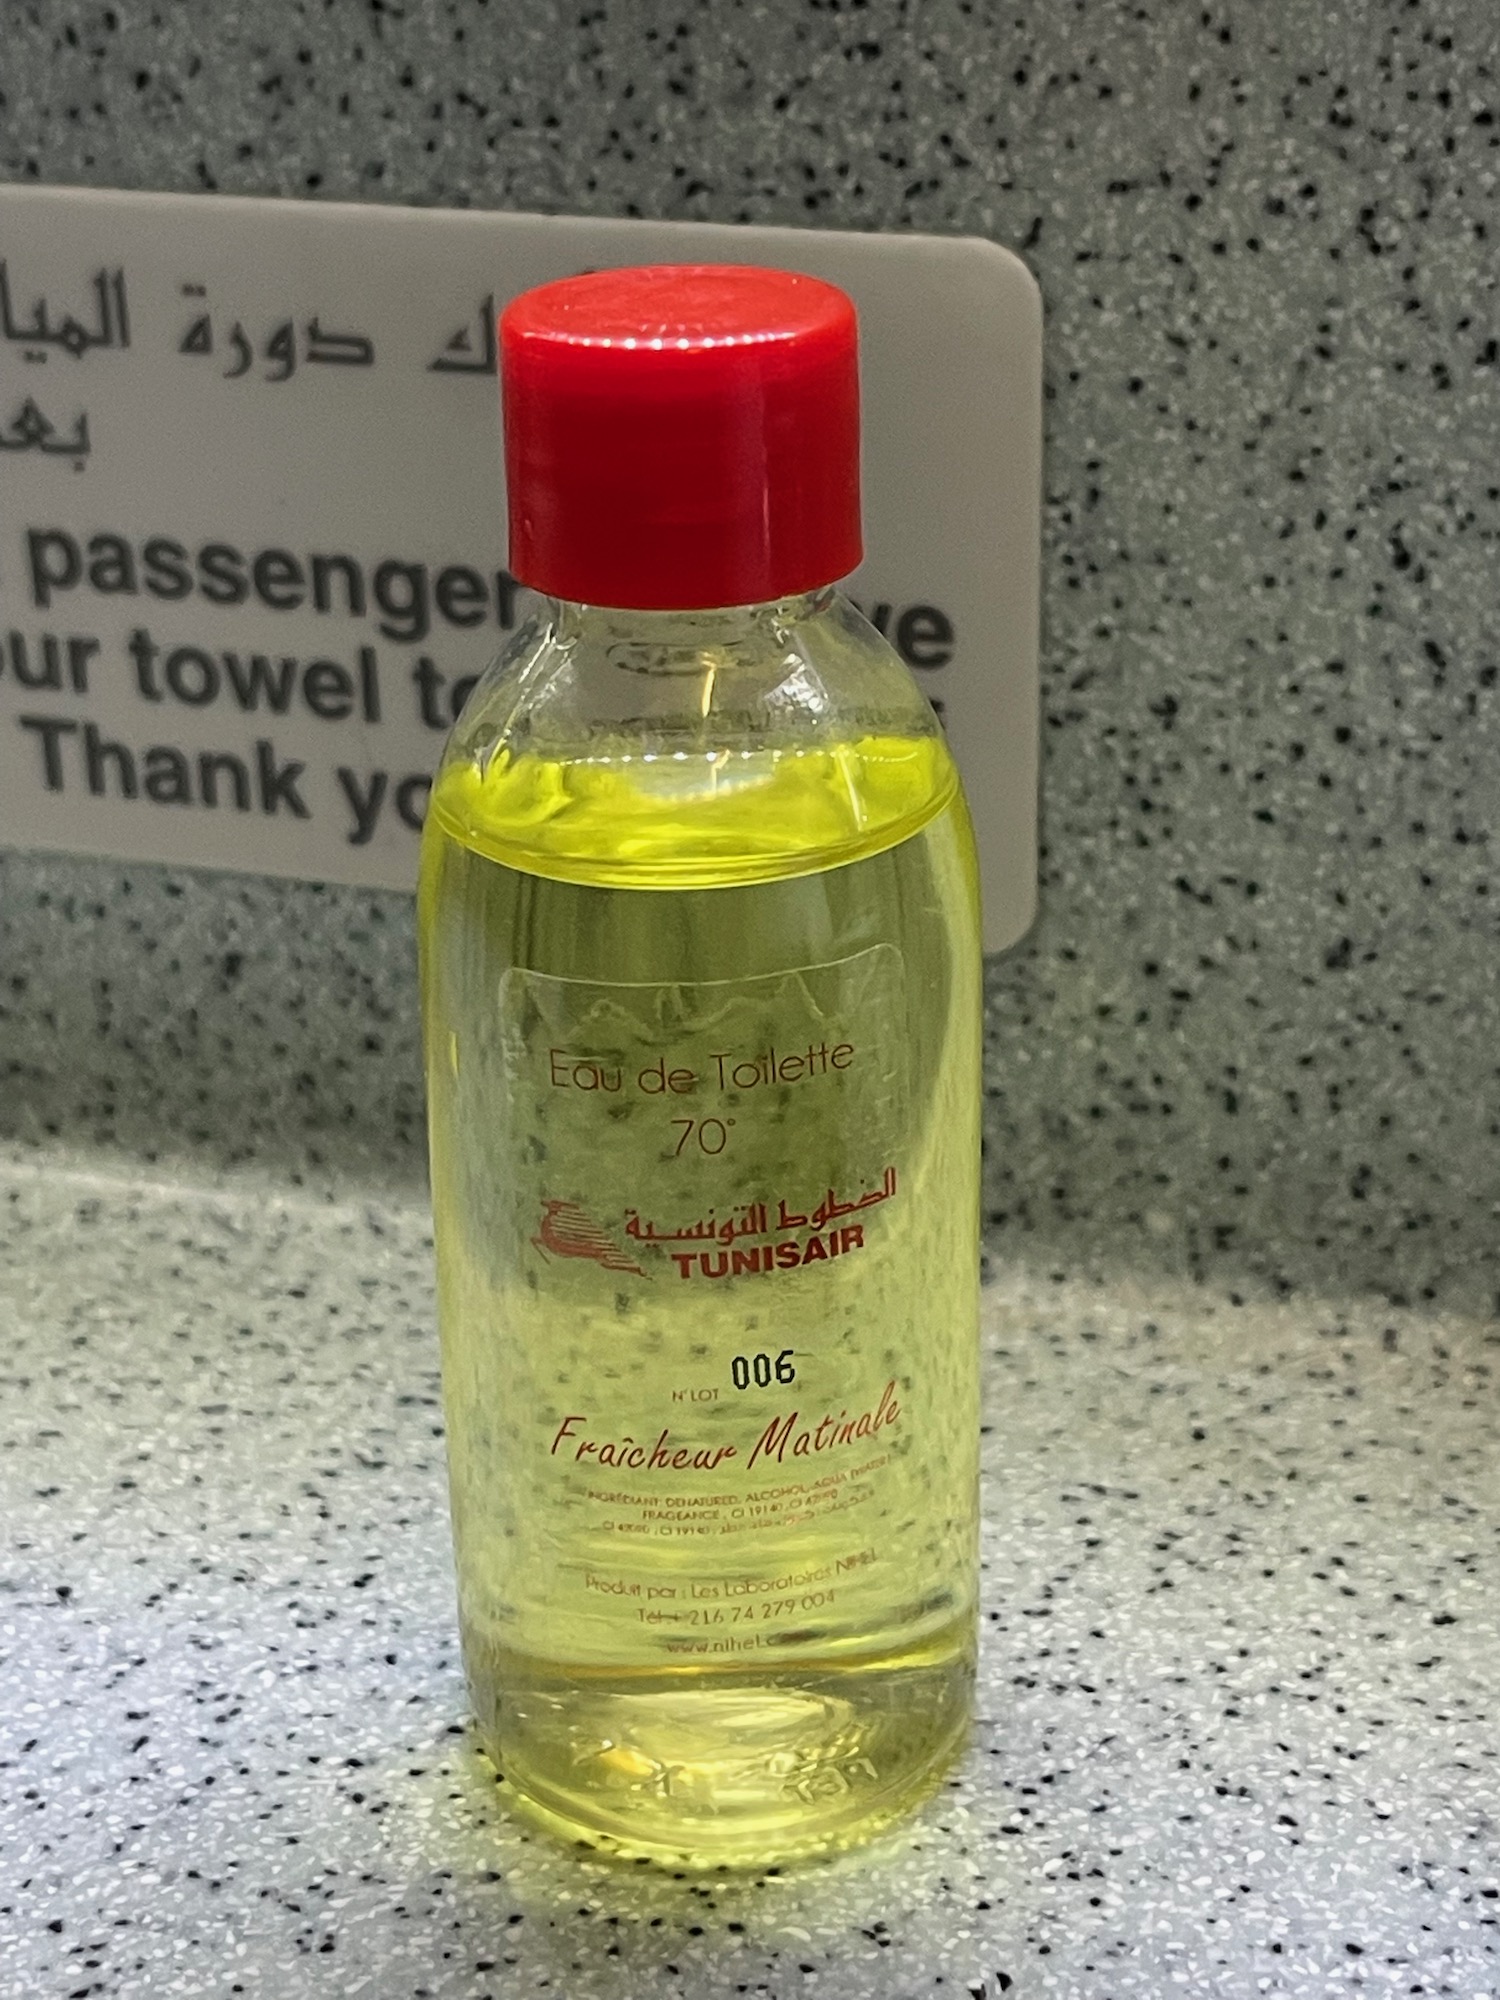 a bottle of liquid on a counter